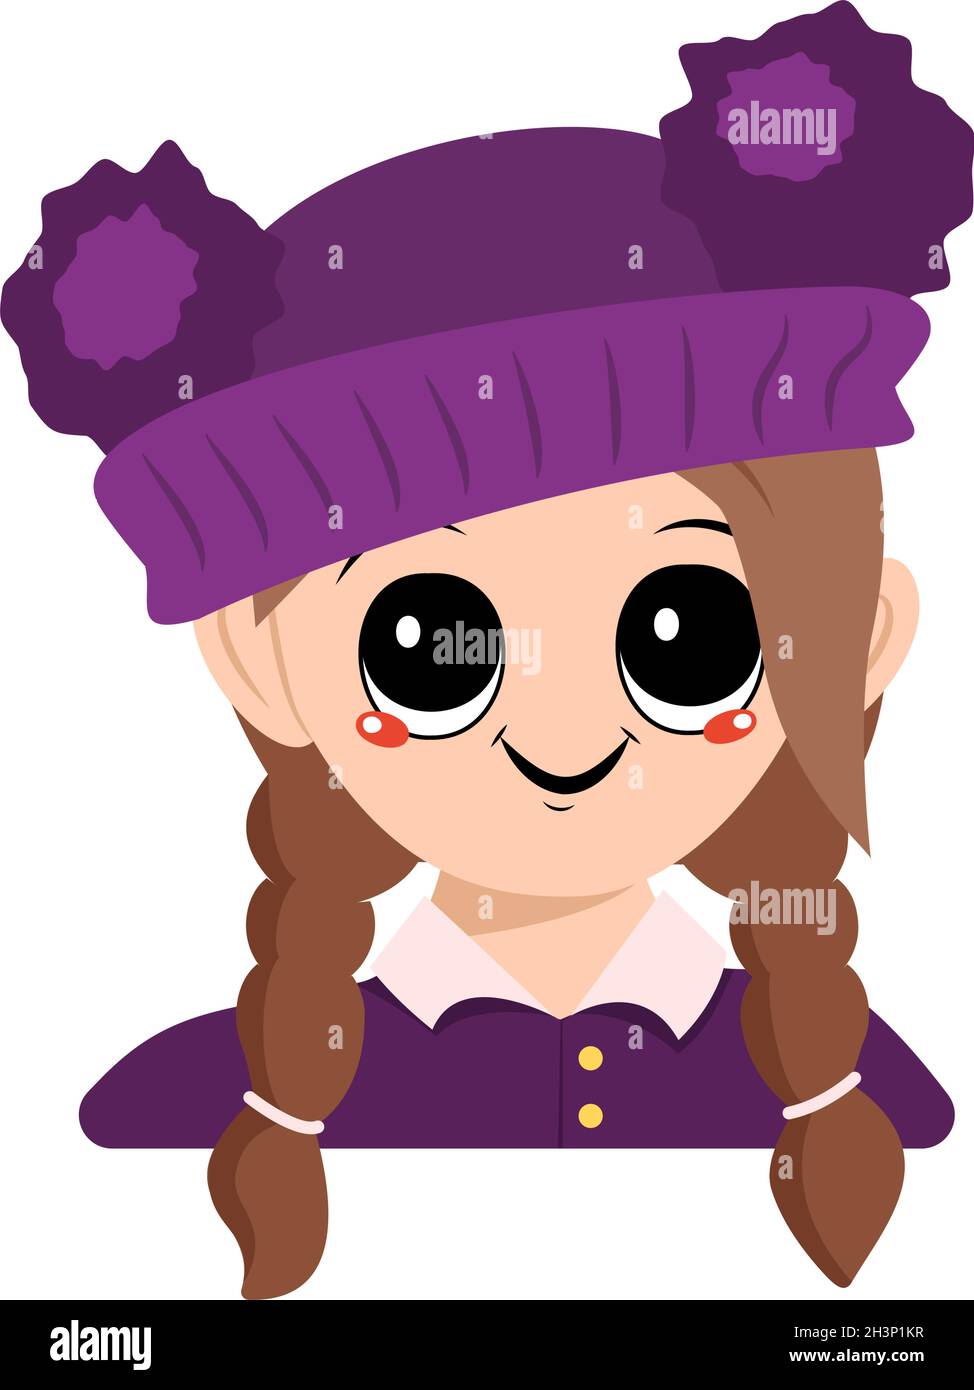 Avatar of a girl with big eyes and a wide happy smile in a purple hat ...